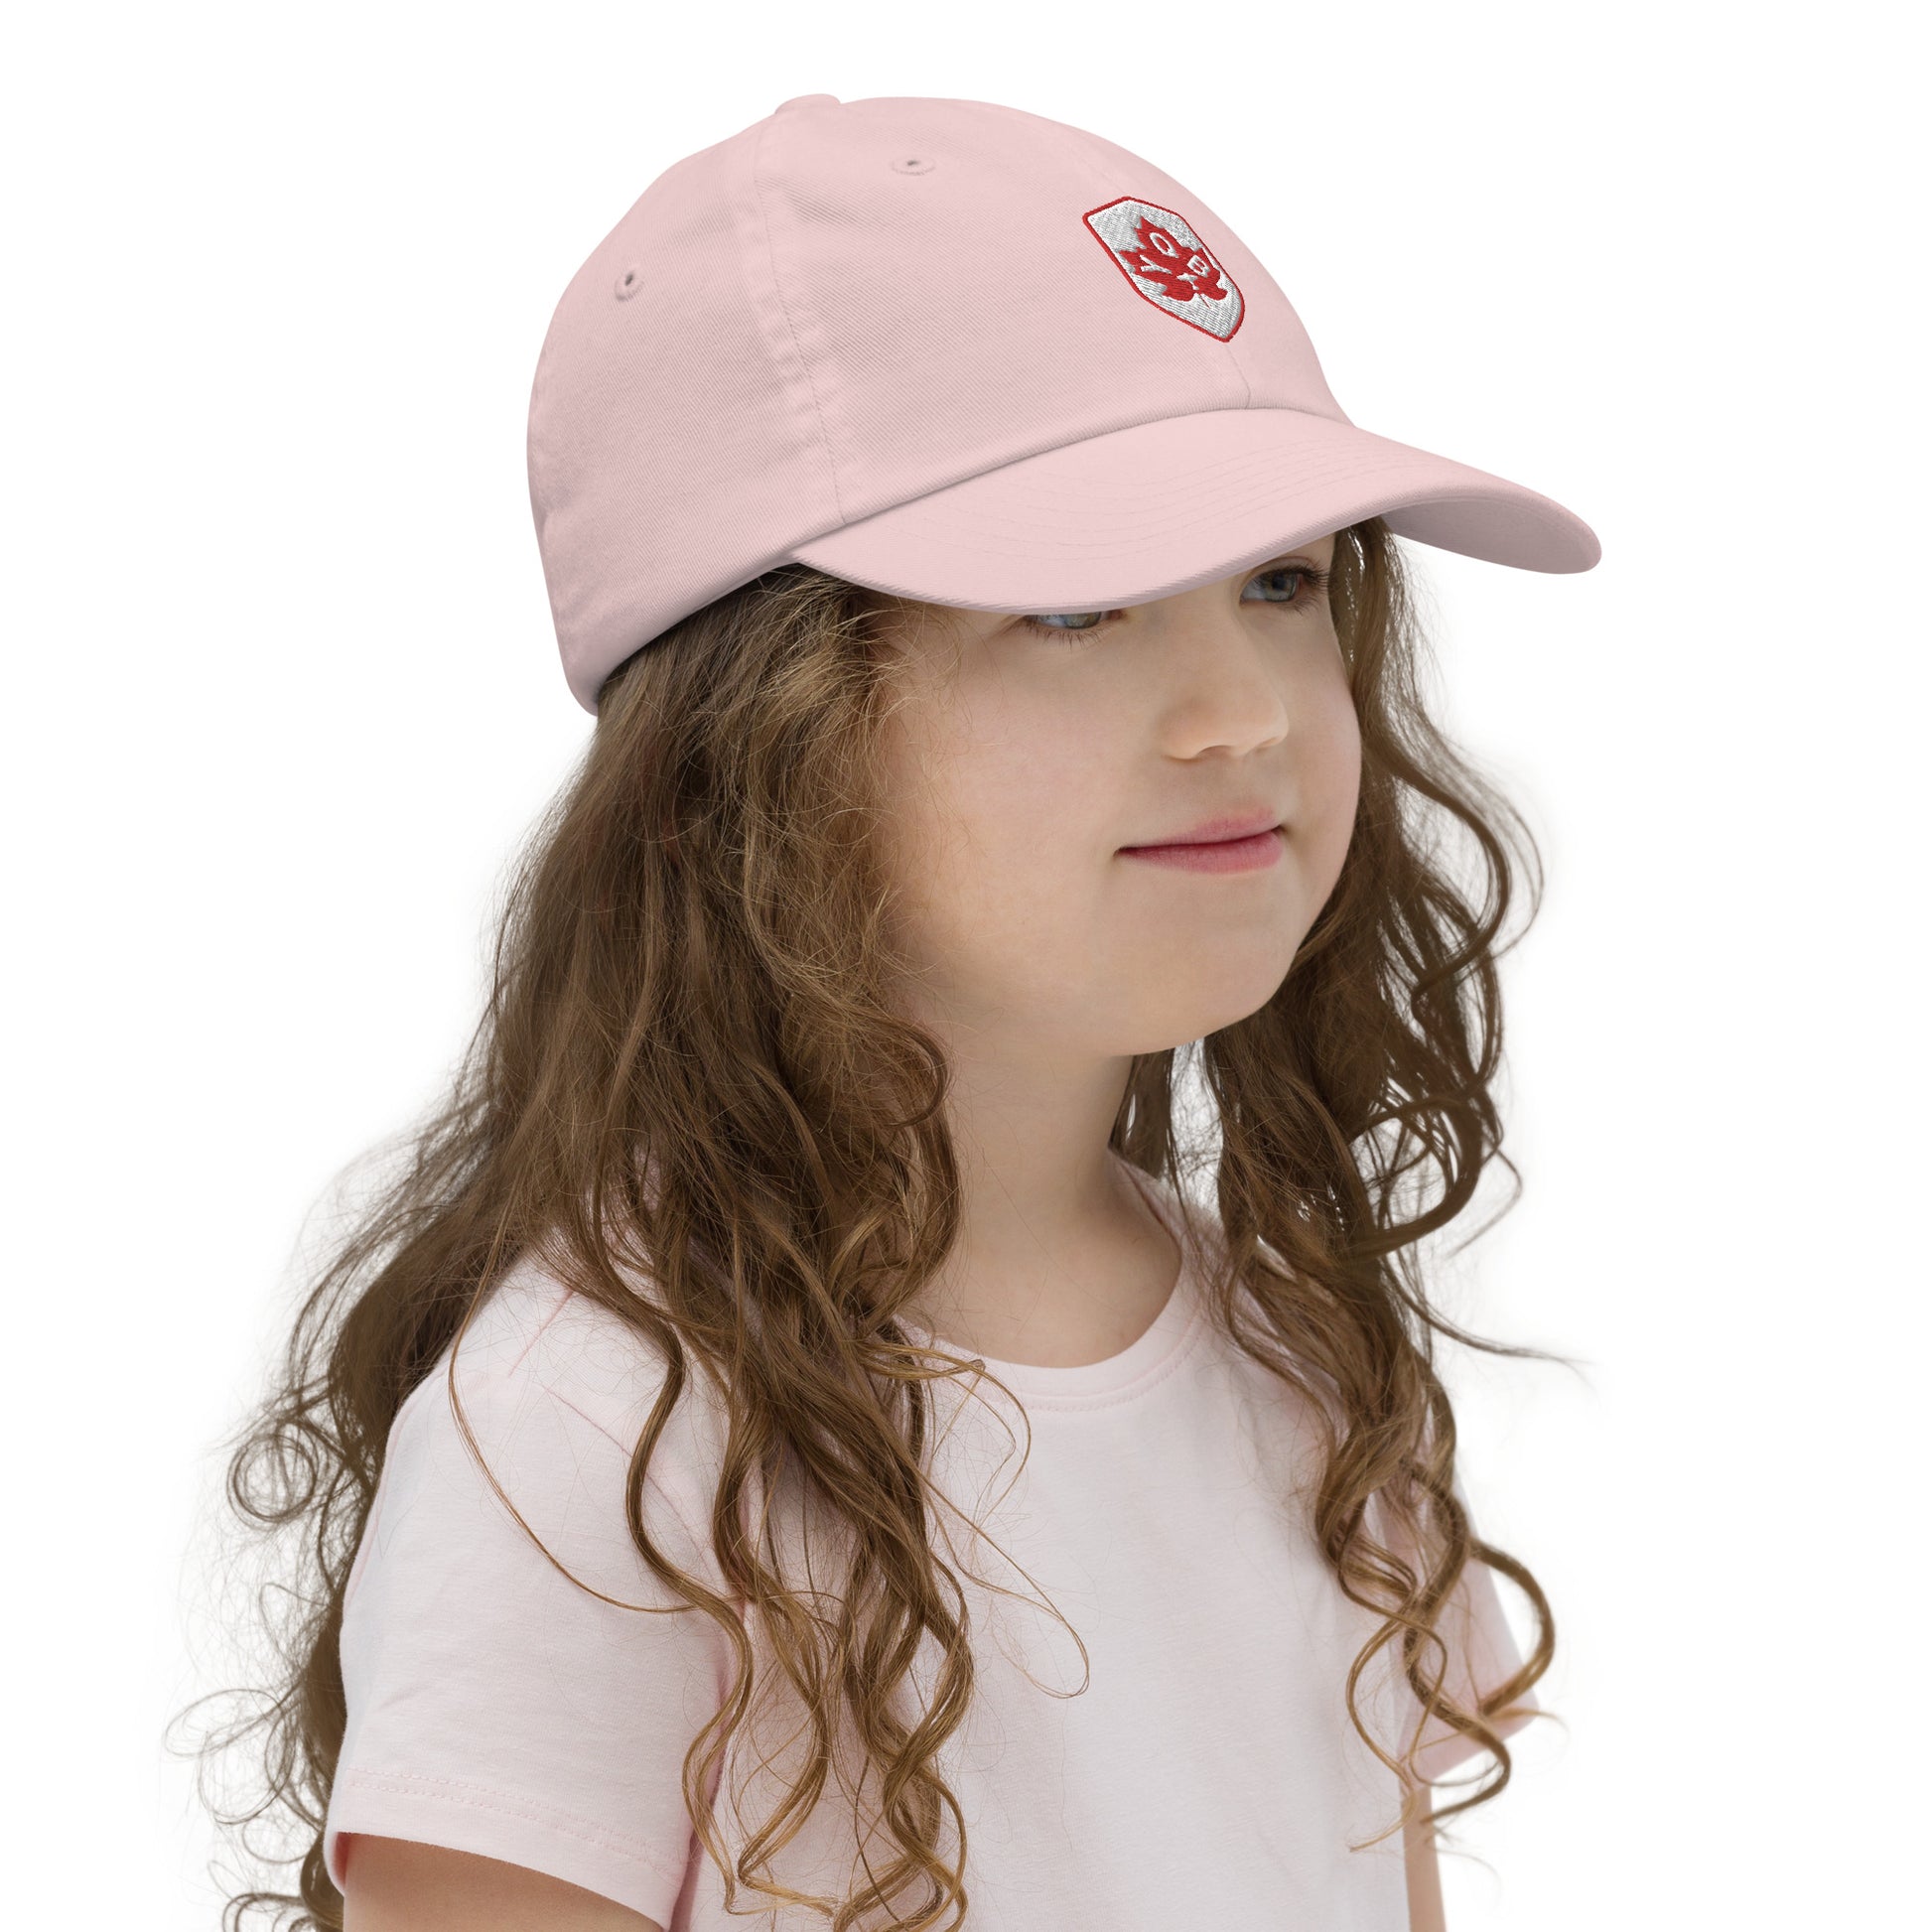 Maple Leaf Kid's Cap - Red/White • YQB Quebec City • YHM Designs - Image 07